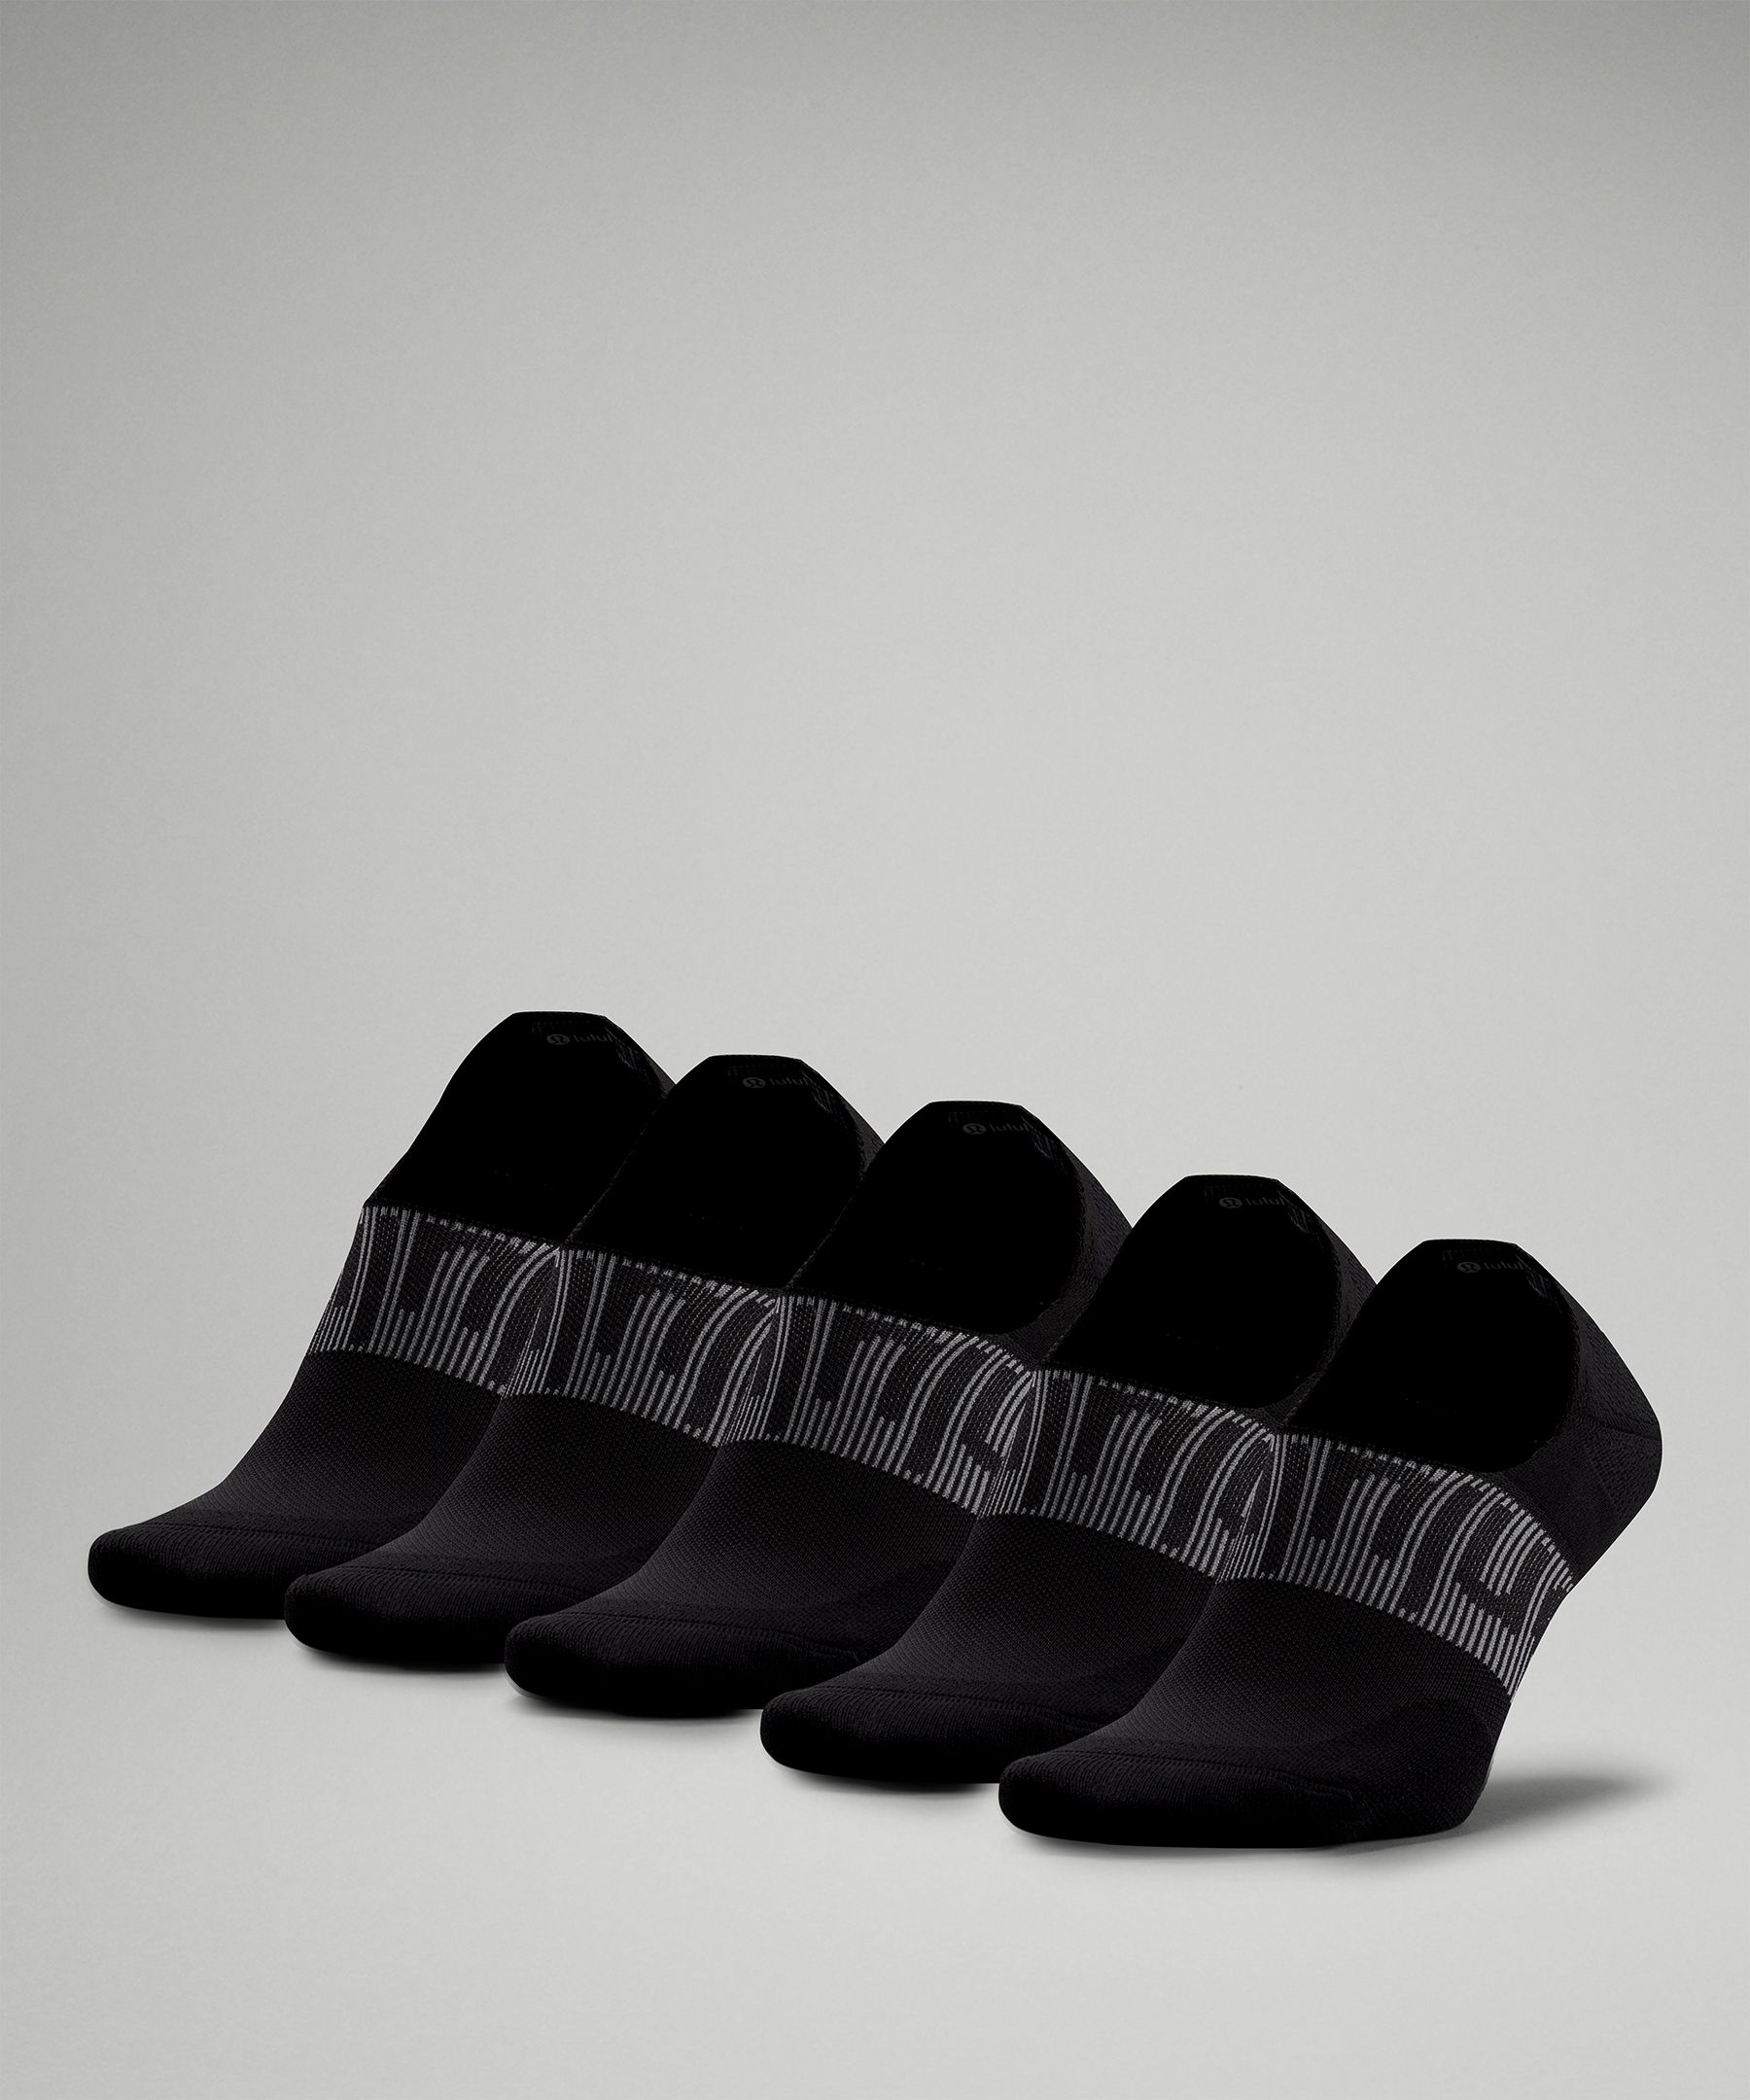 Lululemon Power Stride No-Show Sock with Active Grip 5 Pack